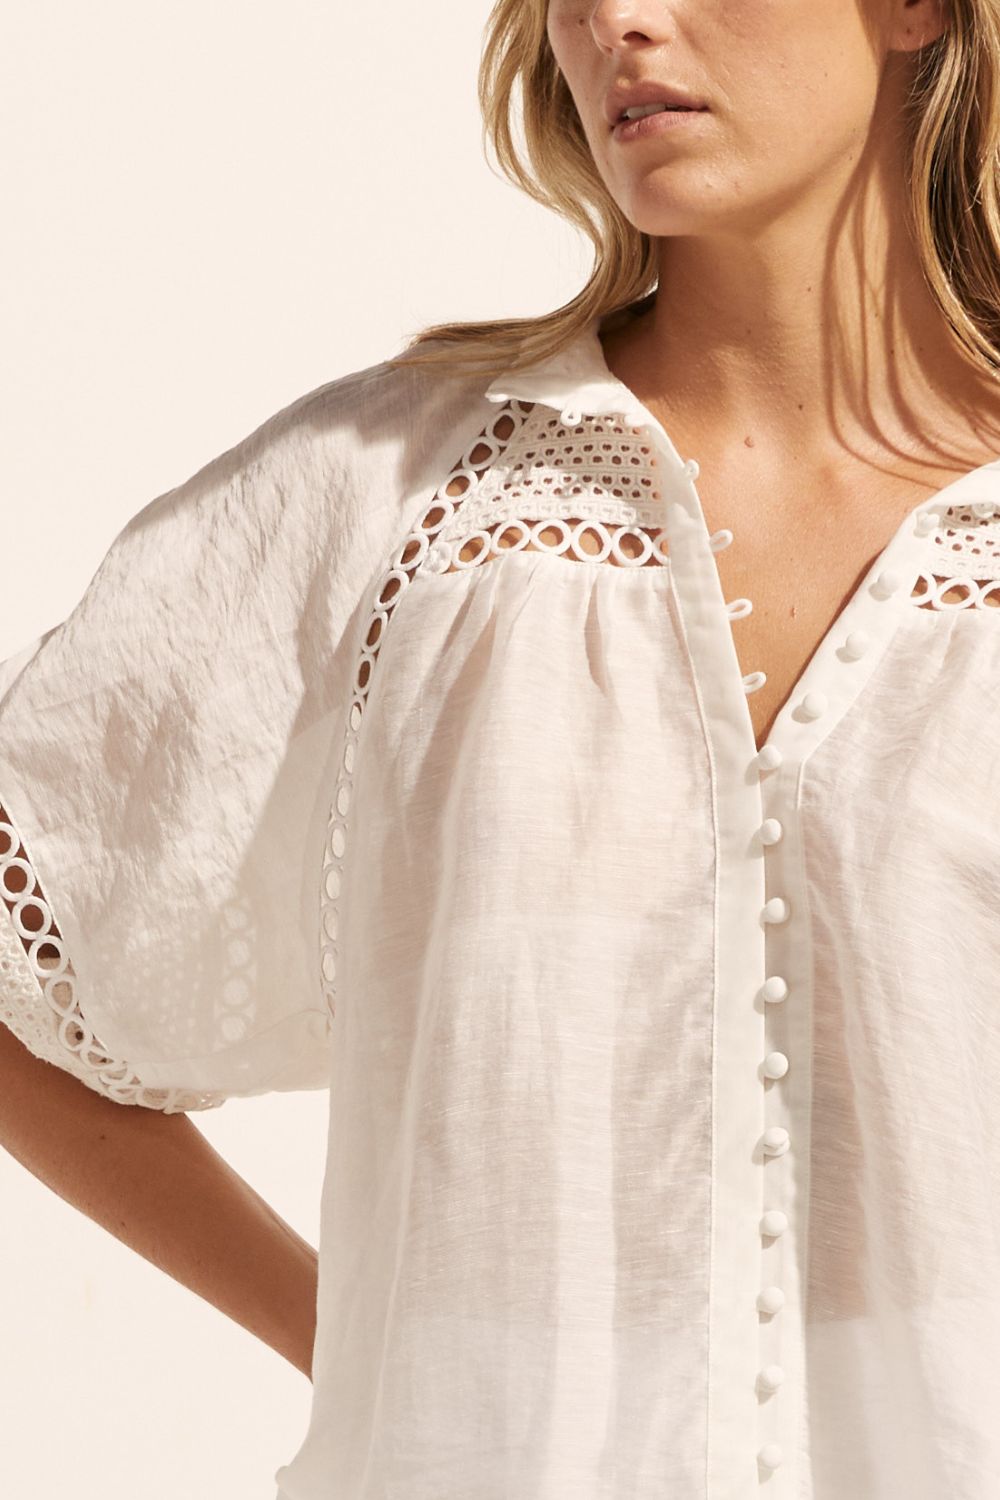 white, top, high neck, mid-length sleeve, covered buttons, circular lace detailing, close up image